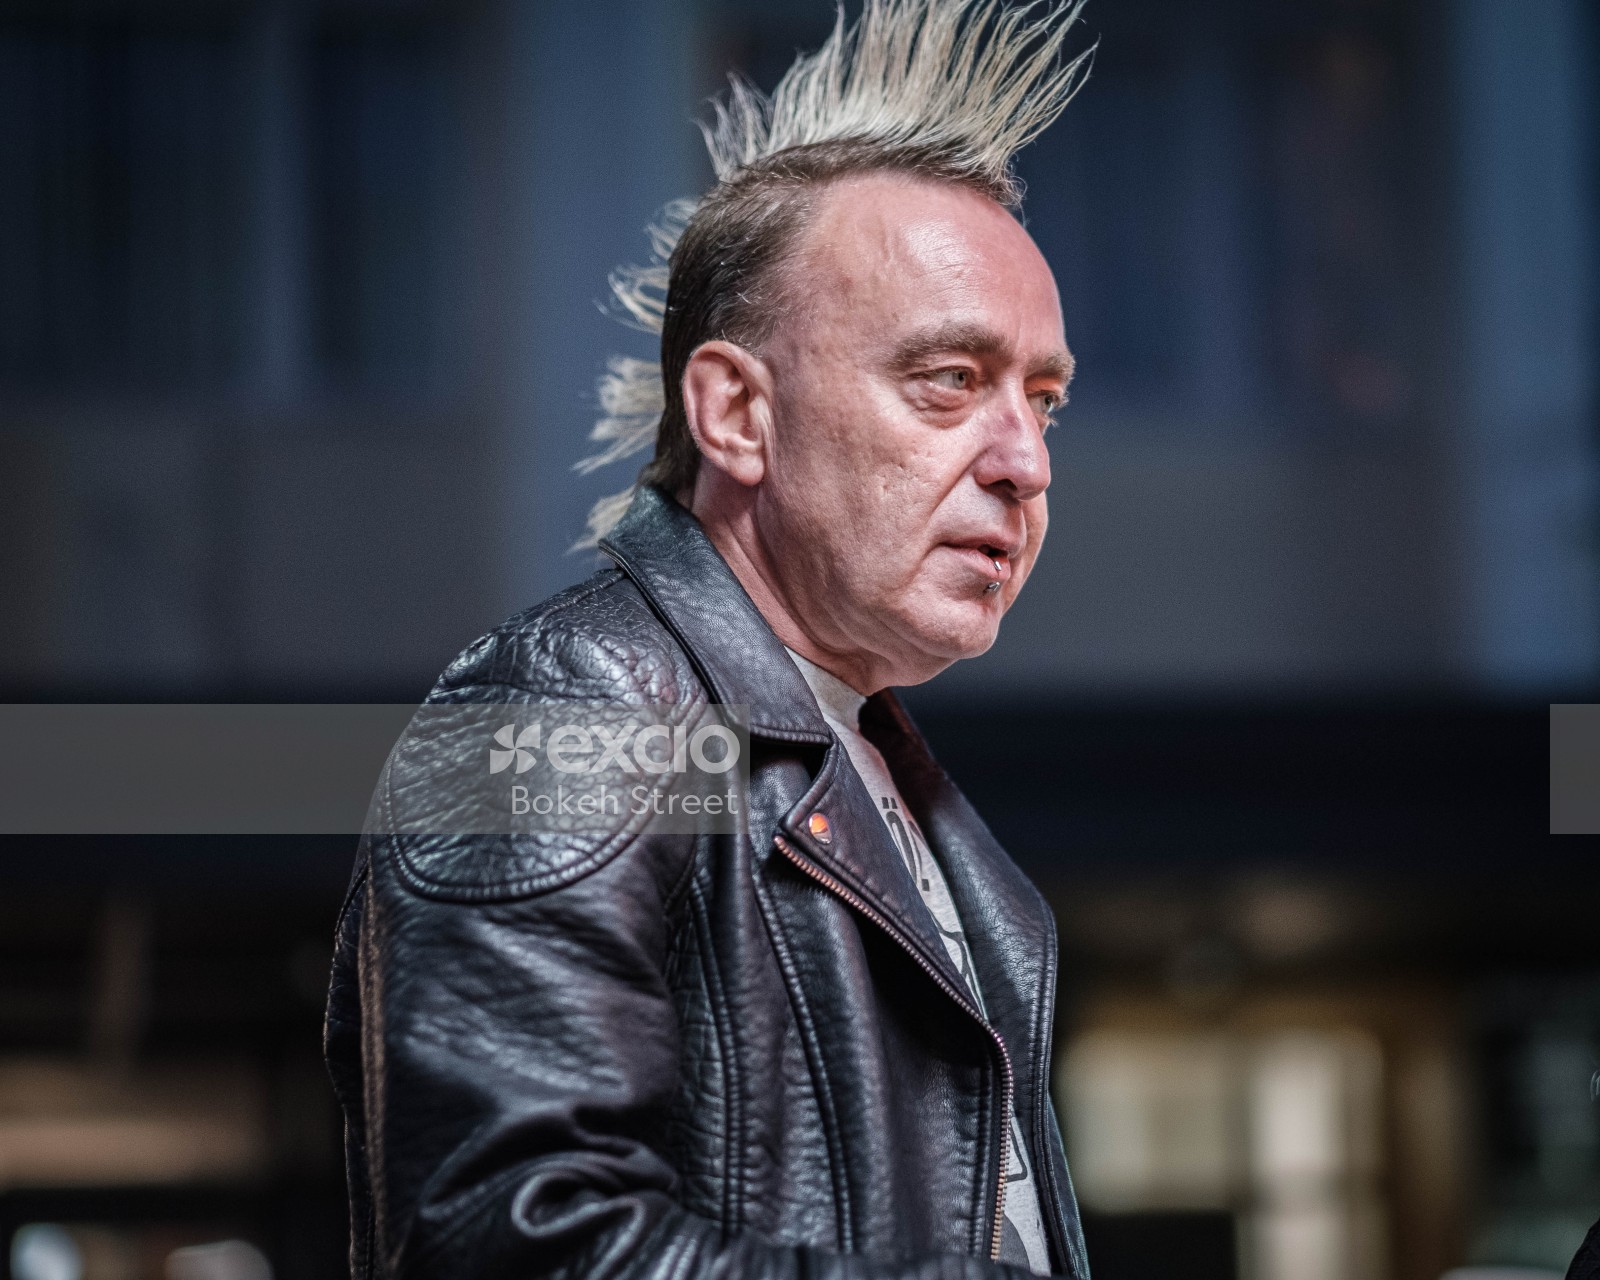 Guy with leather jacket piercing and spiked hairstyle